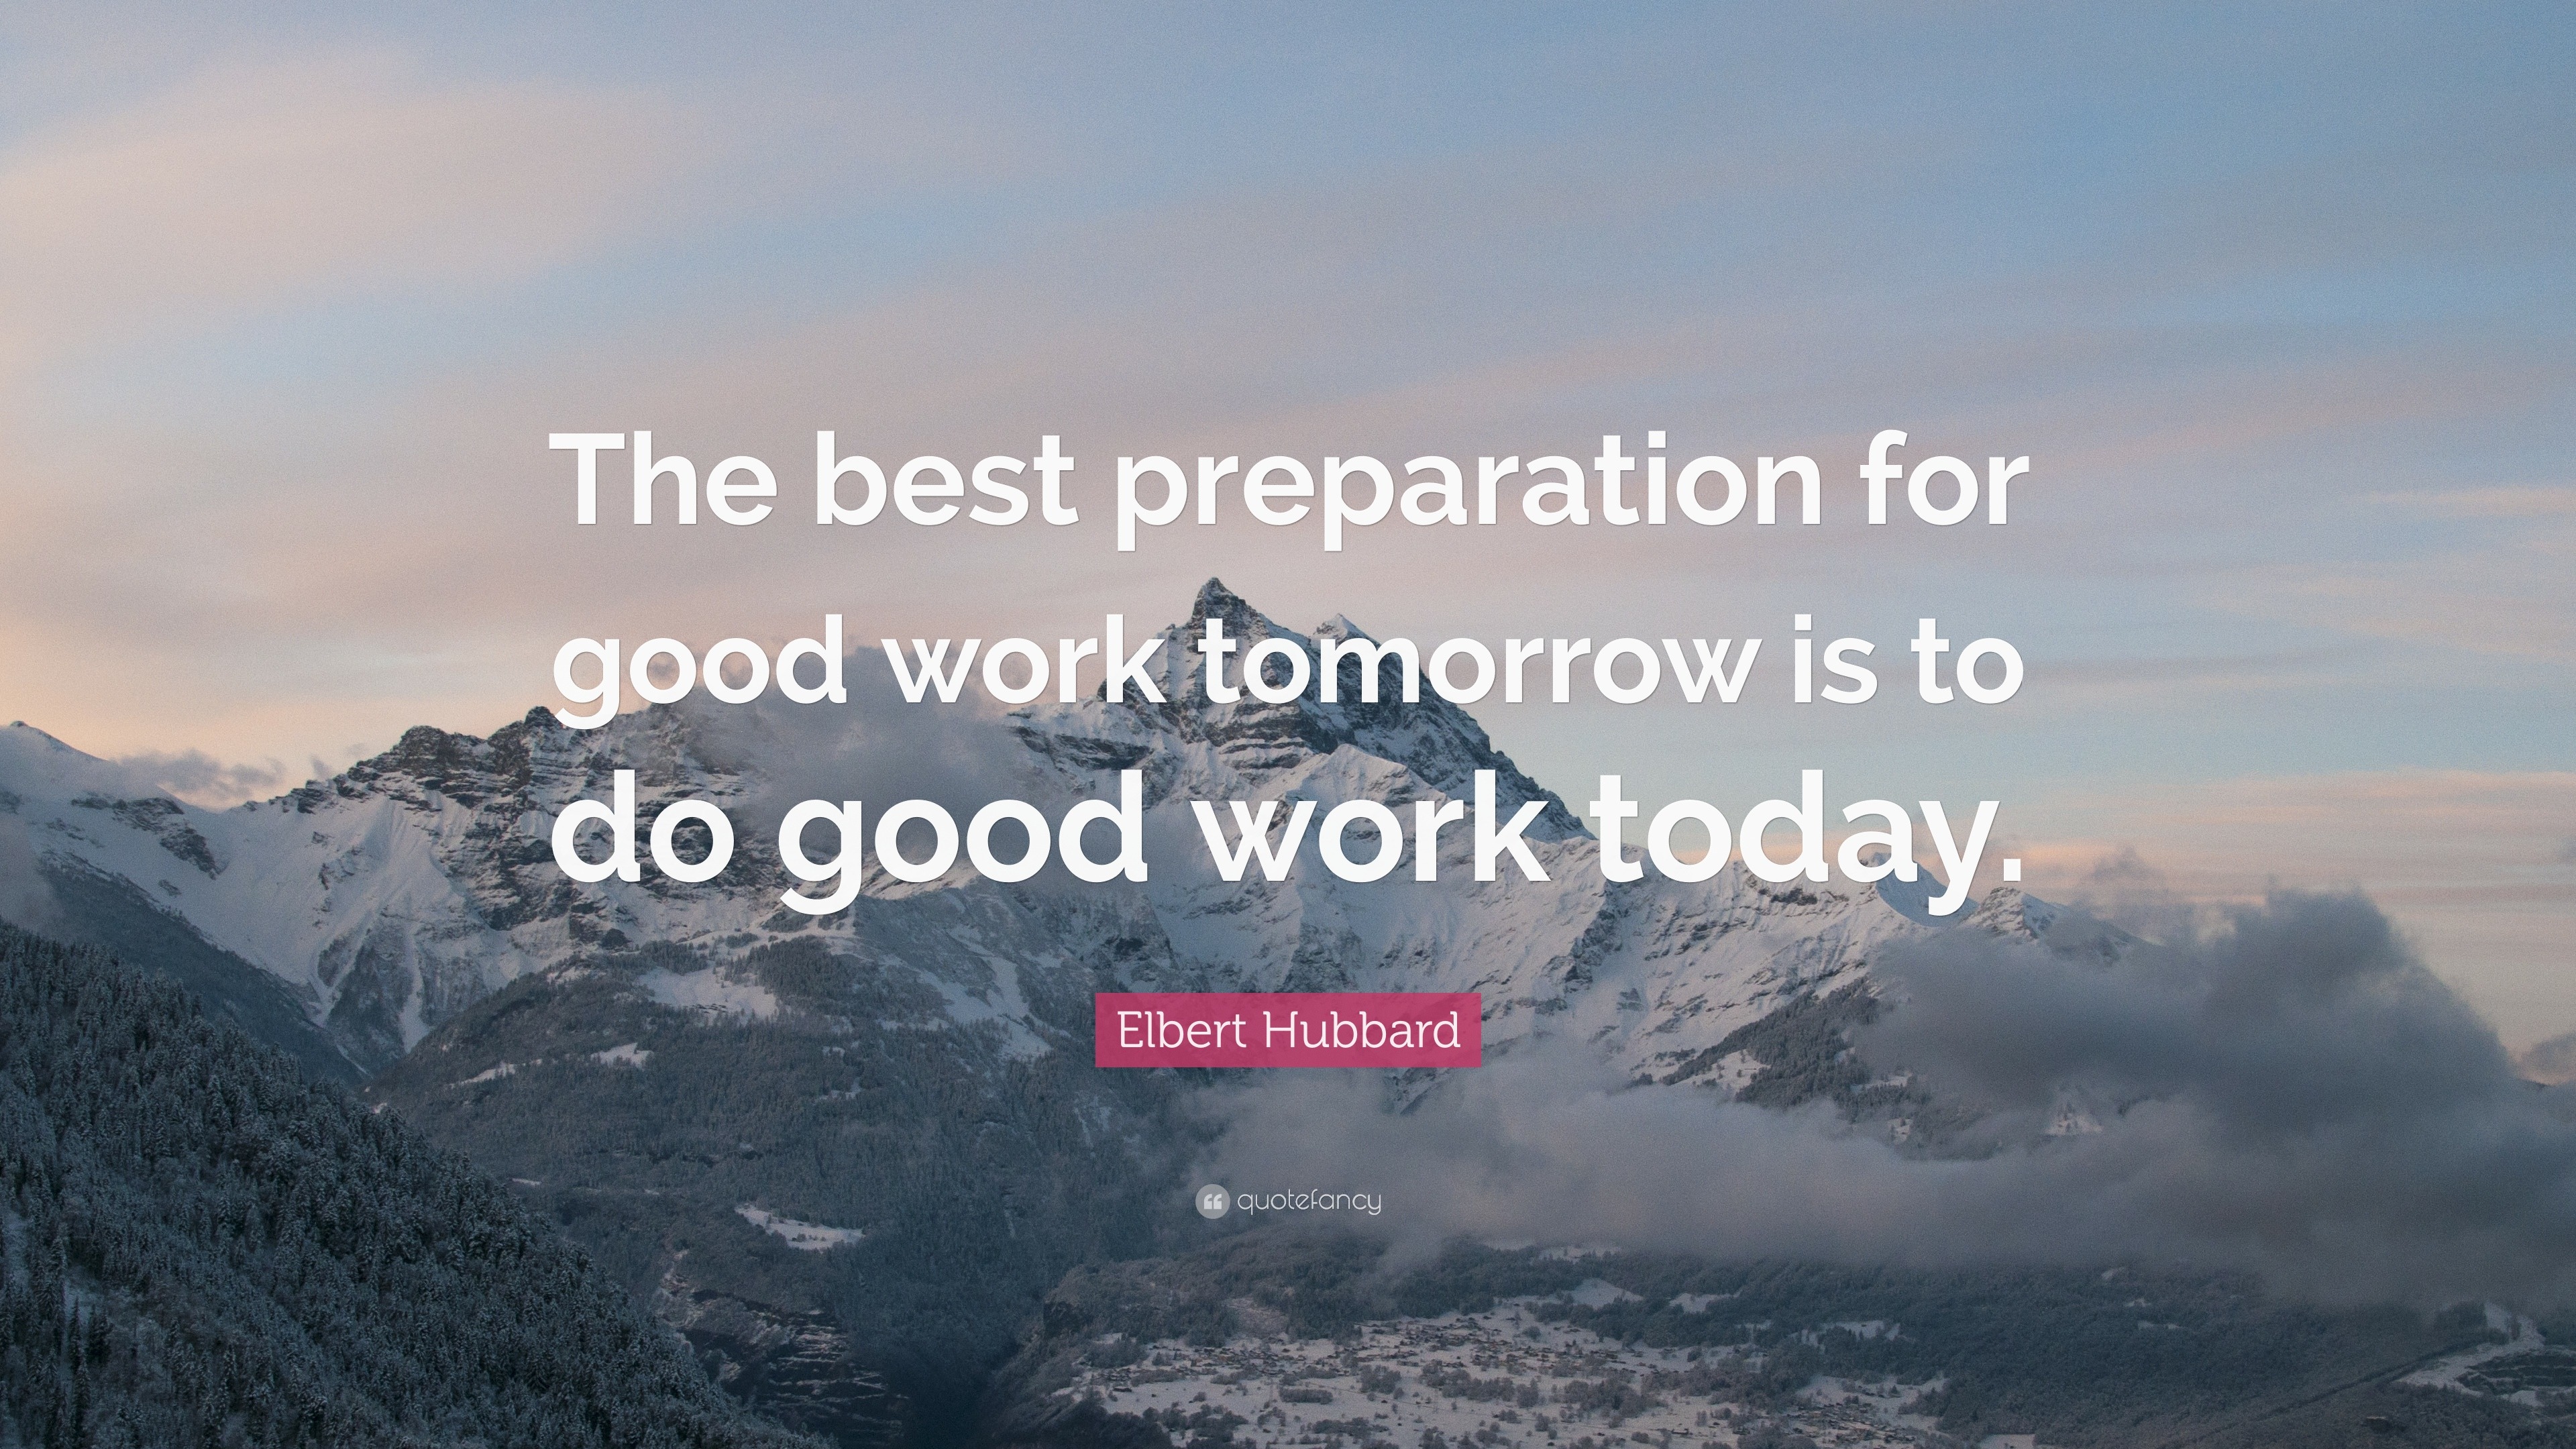 Elbert Hubbard Quote: “The best preparation for good work tomorrow is